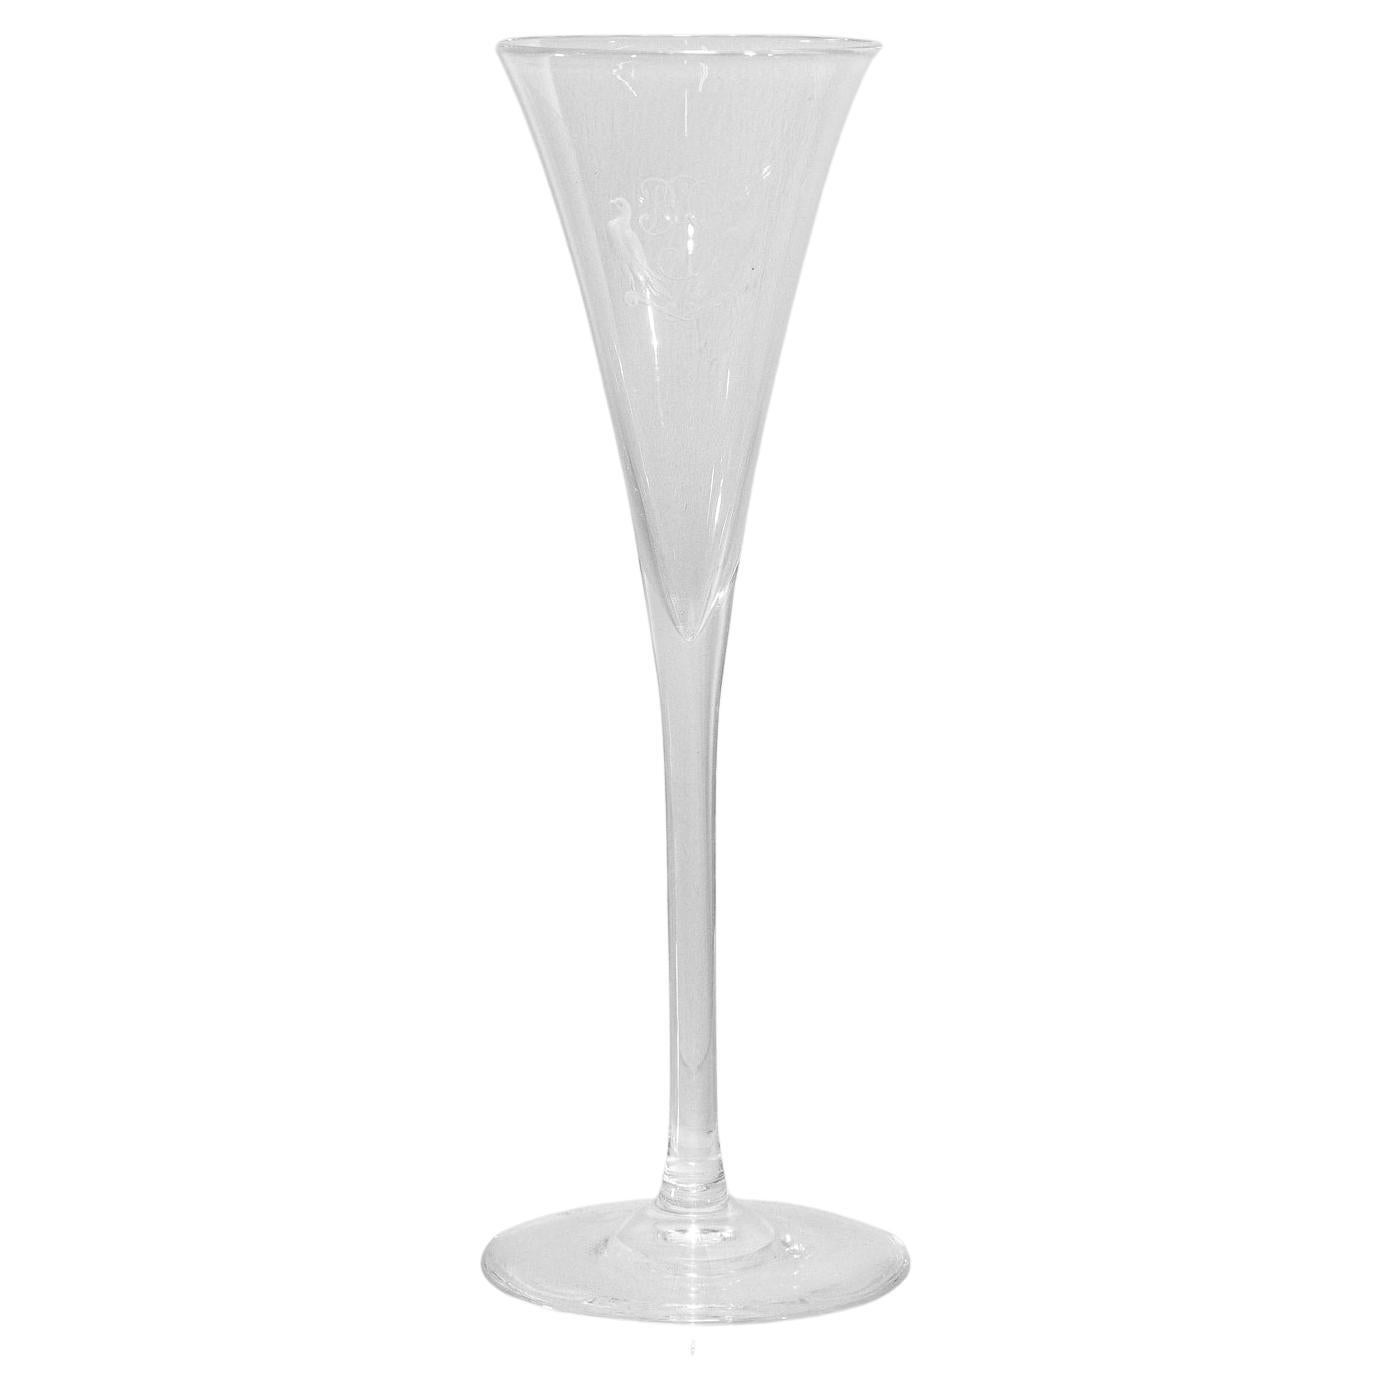 Tiffany Audubon White Wine Glass in Hand-etched Glass